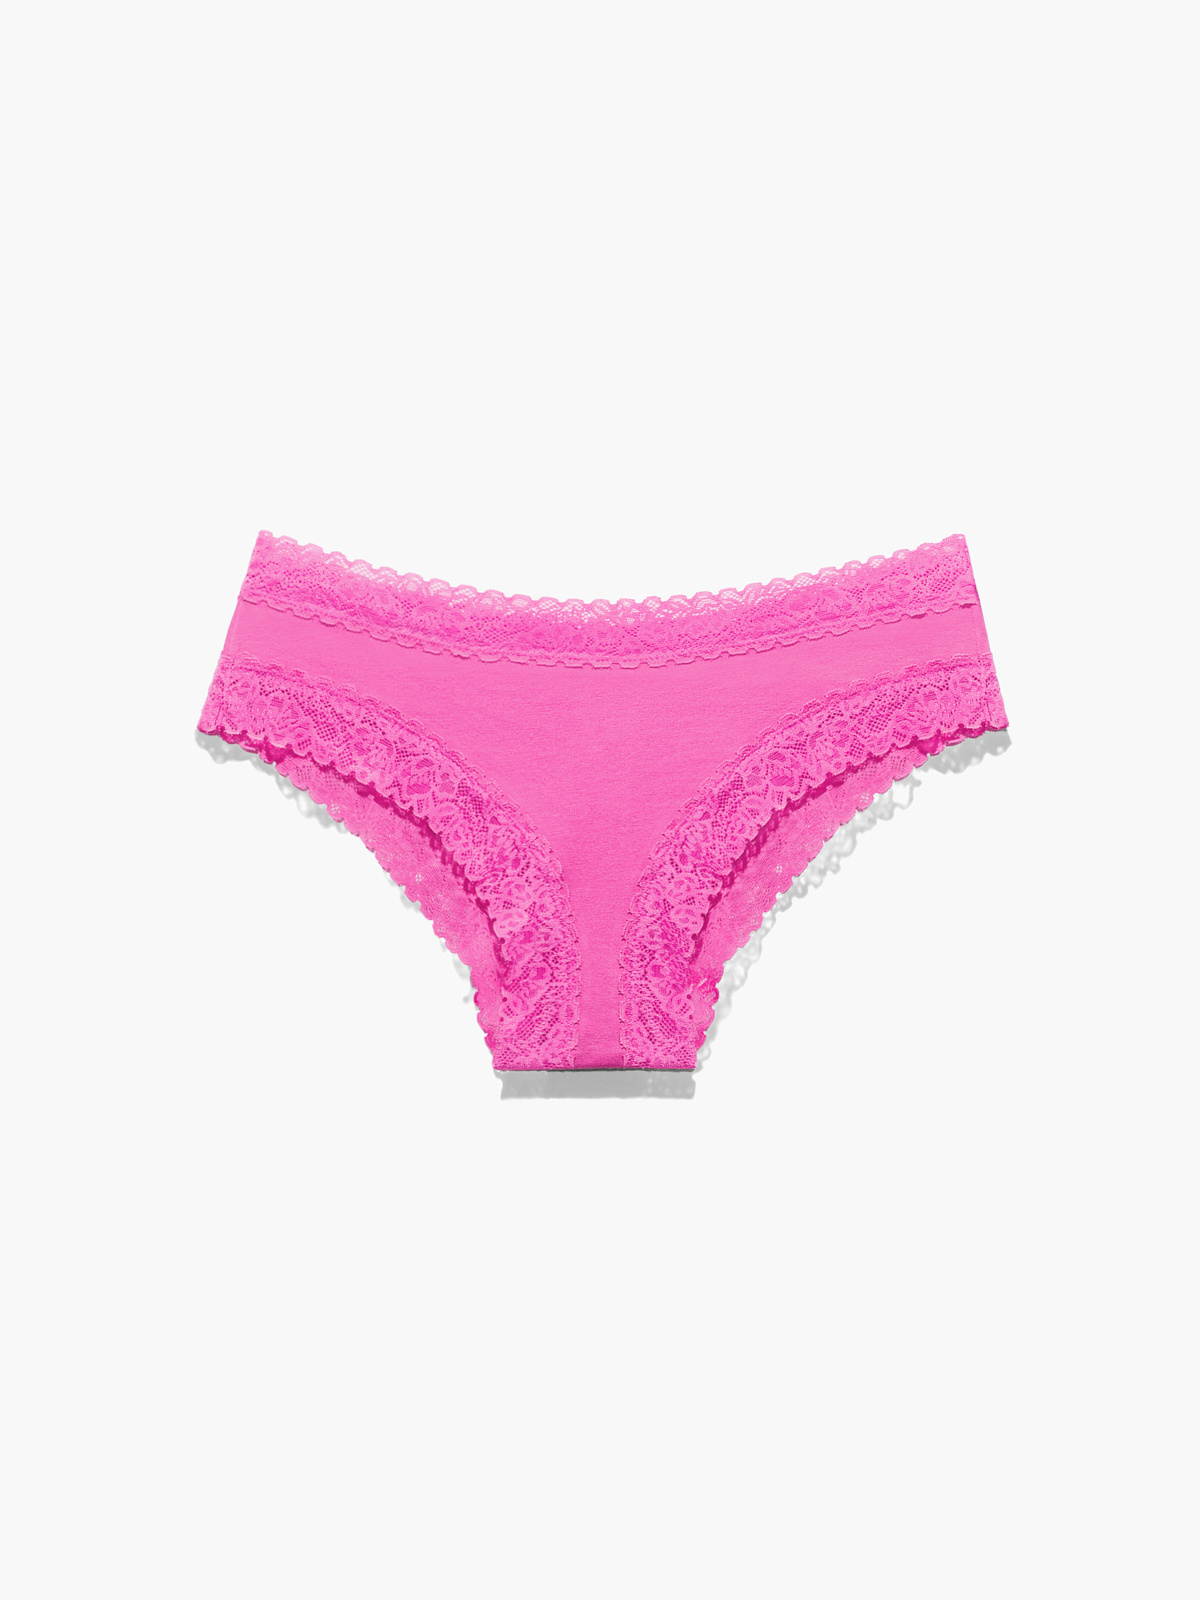 Cotton Essentials Lace-Trim Cheeky Knickers in Pink | SAVAGE X FENTY UK ...